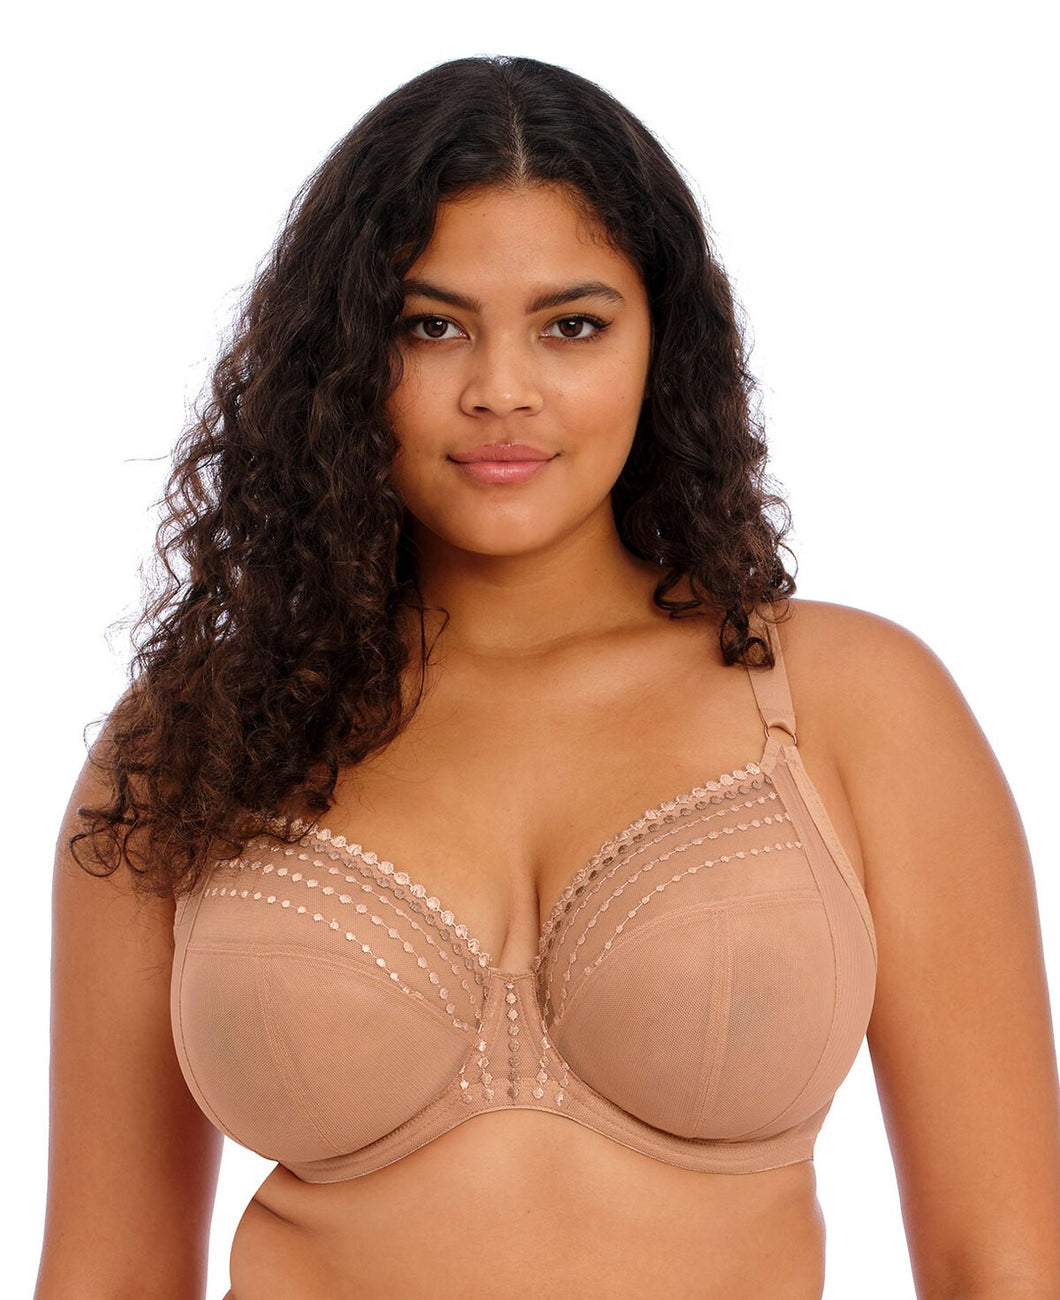 Friday's Image - She's a BESTSELLER for a reason!! Elomi Matilda is without  a doubt a superstar bra - she fits like an absolute dream!! Designed to  support and flatter larger cup